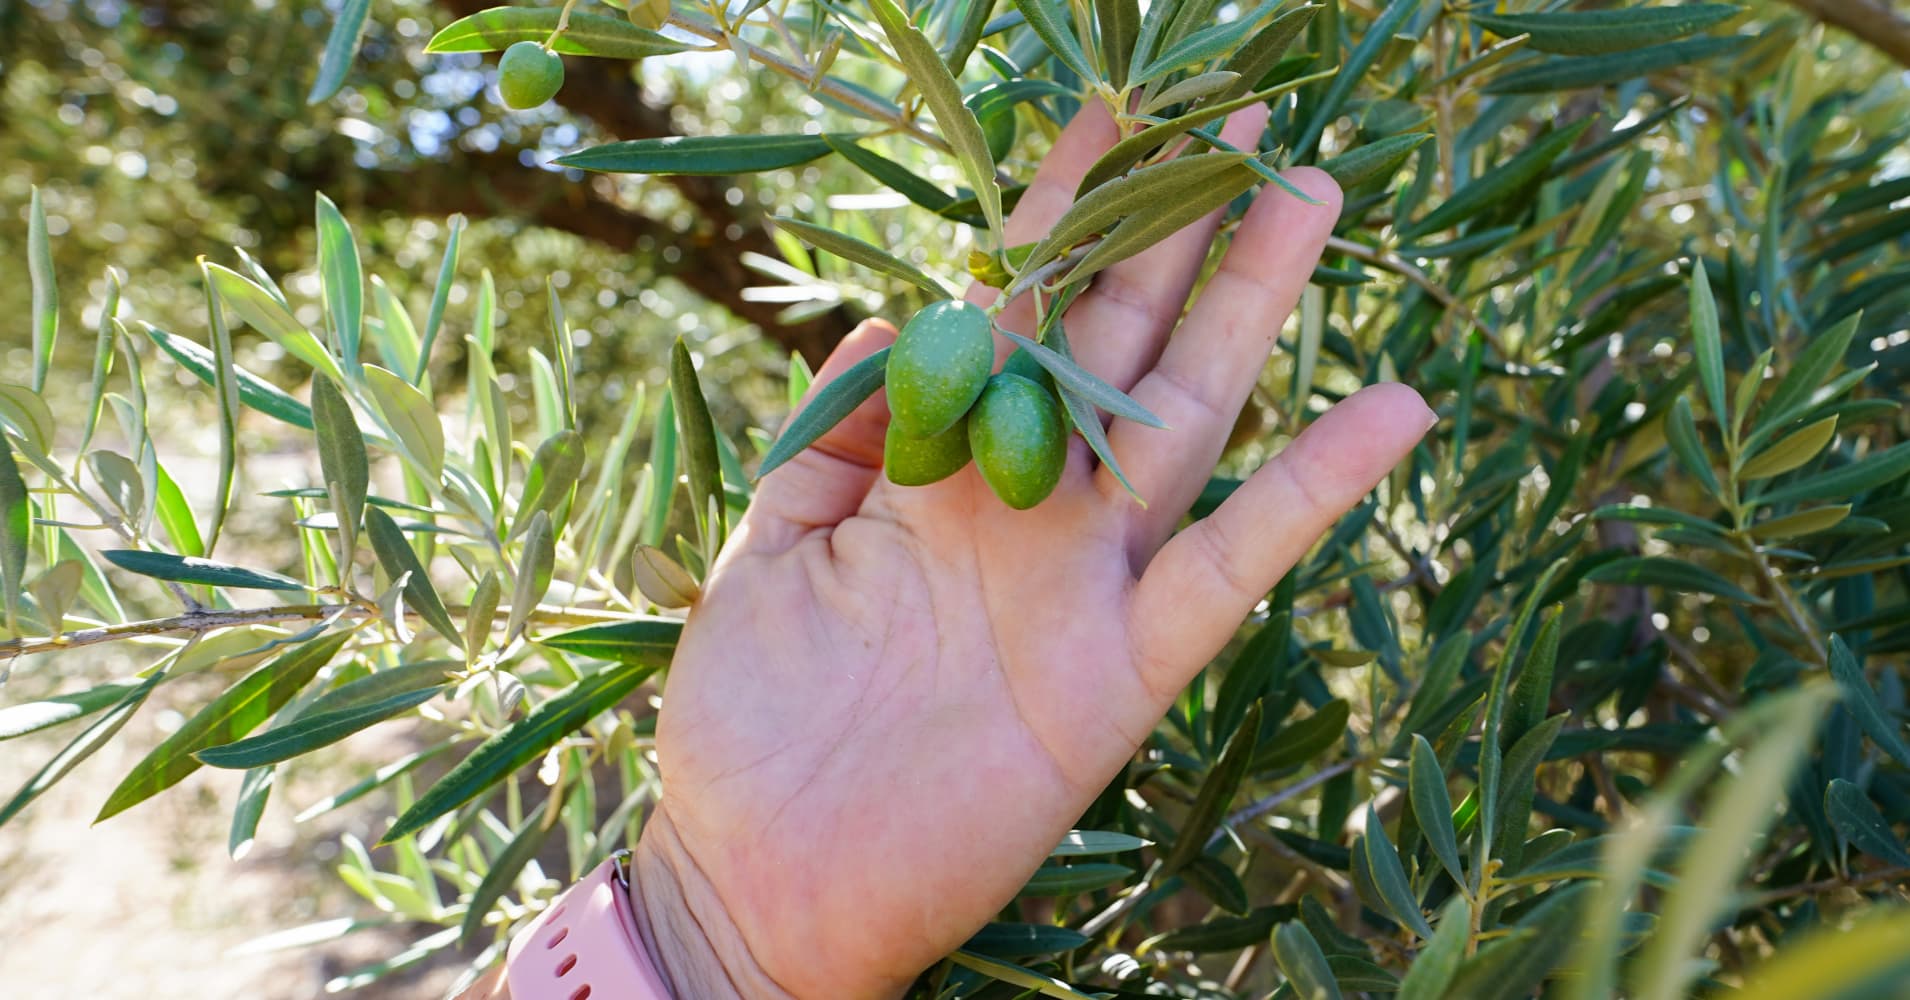 world's largest olive oil producer says the industry faces one of its toughest moments ever